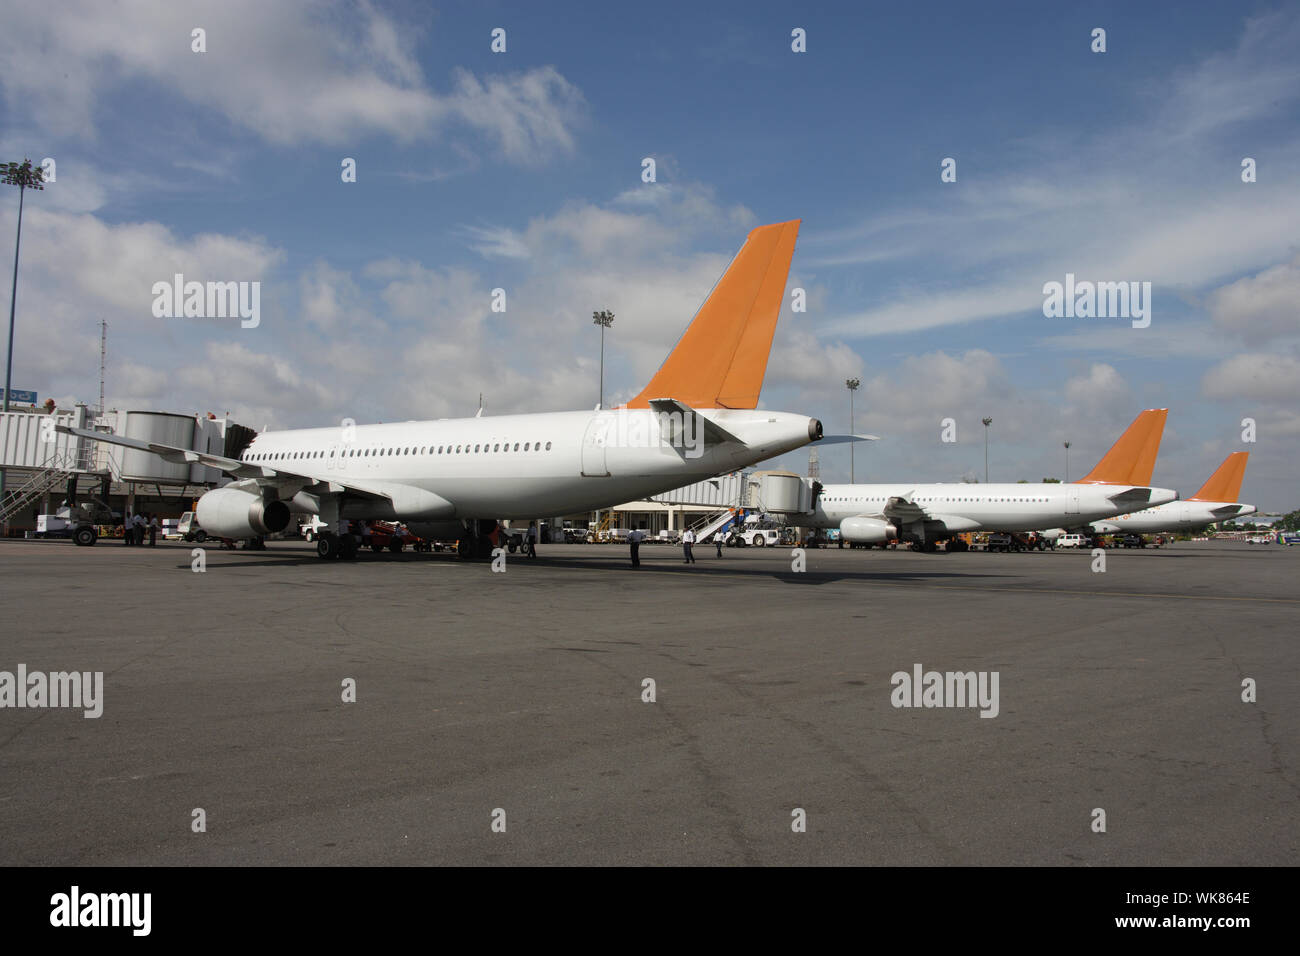 Airplanes at an airport, India Stock Photo